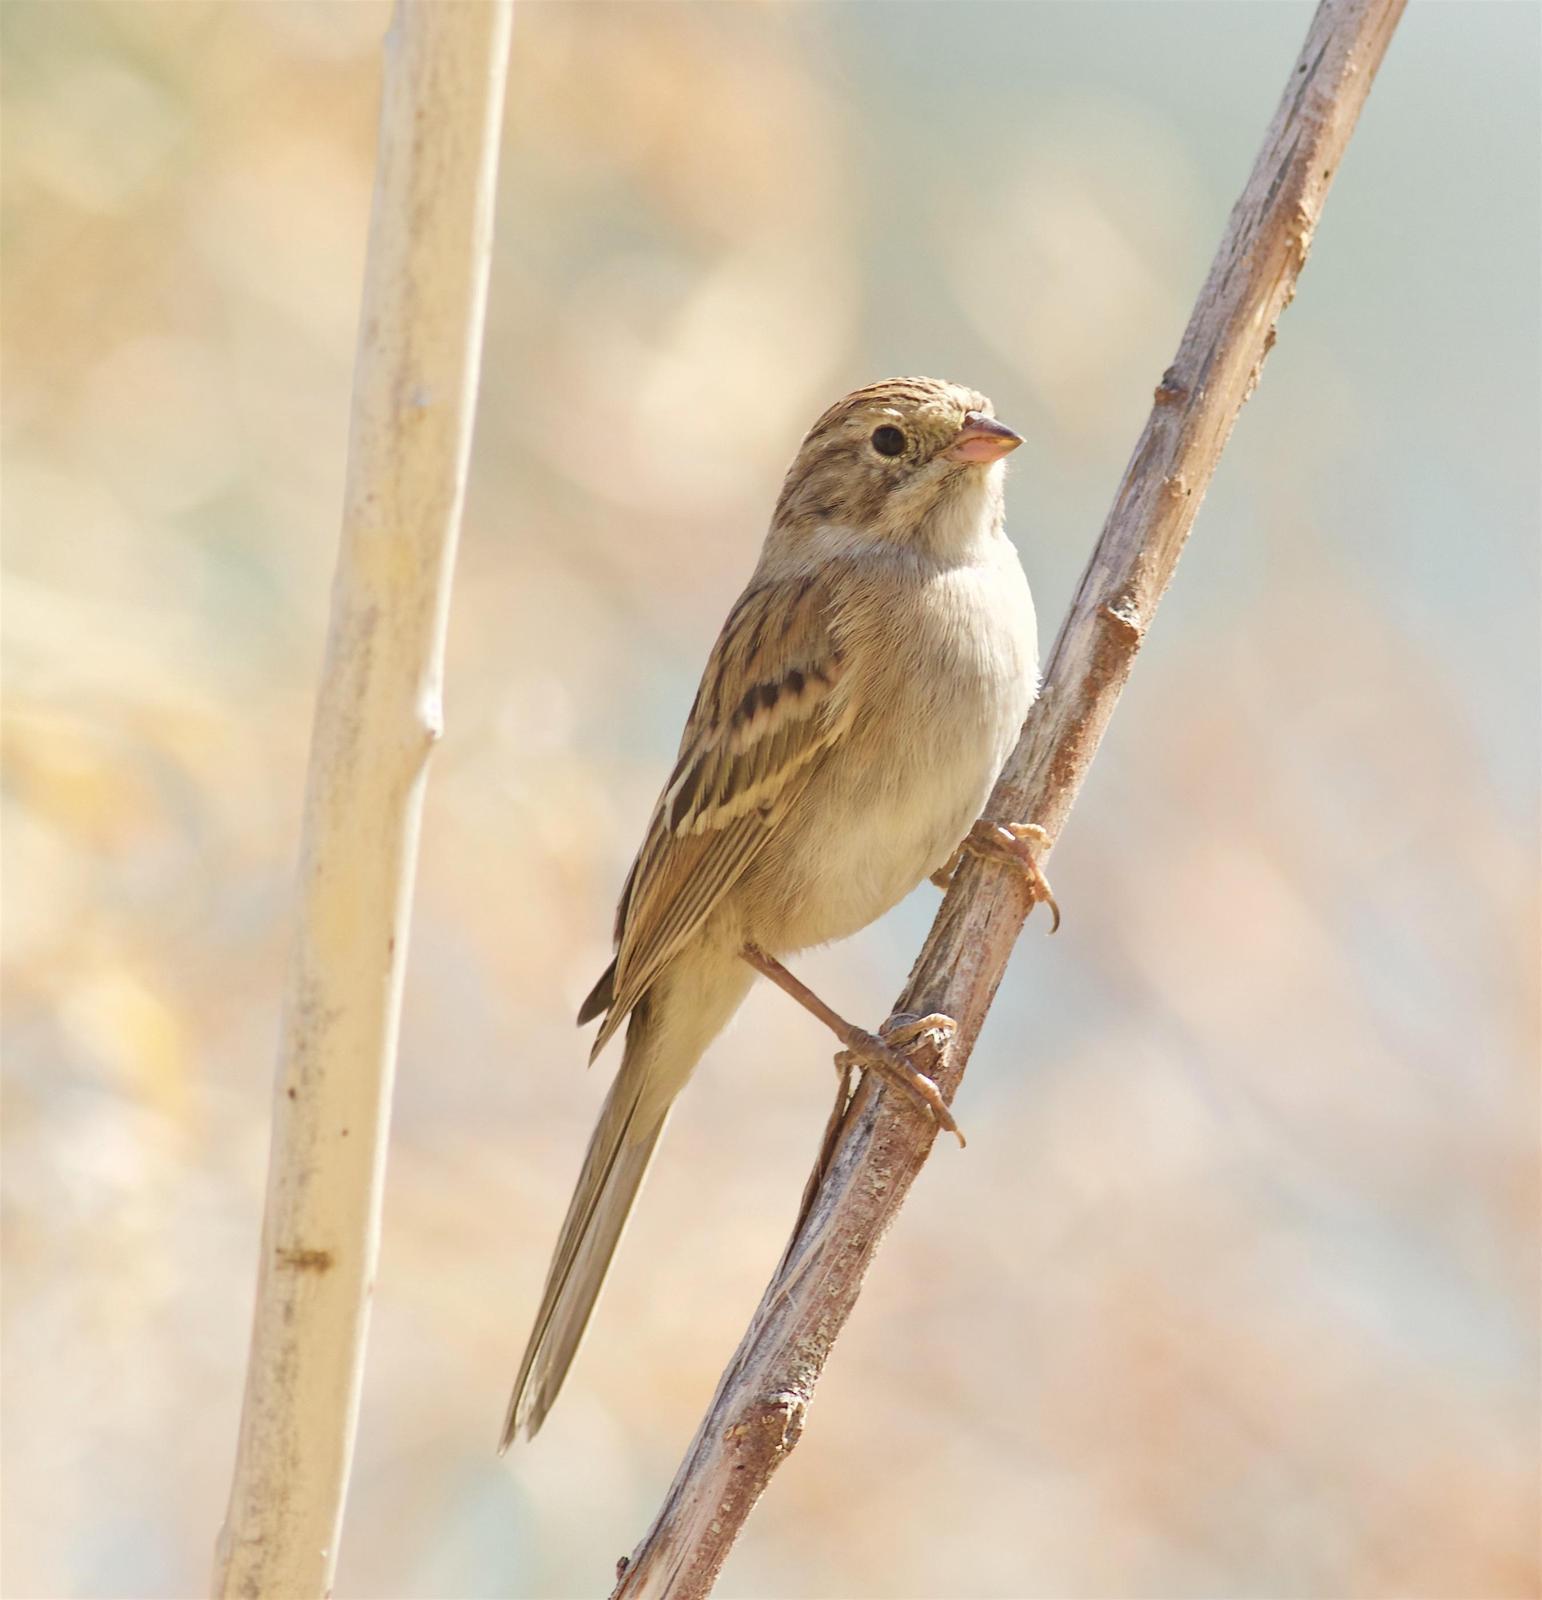 Brewer's Sparrow Photo by Kathryn Keith